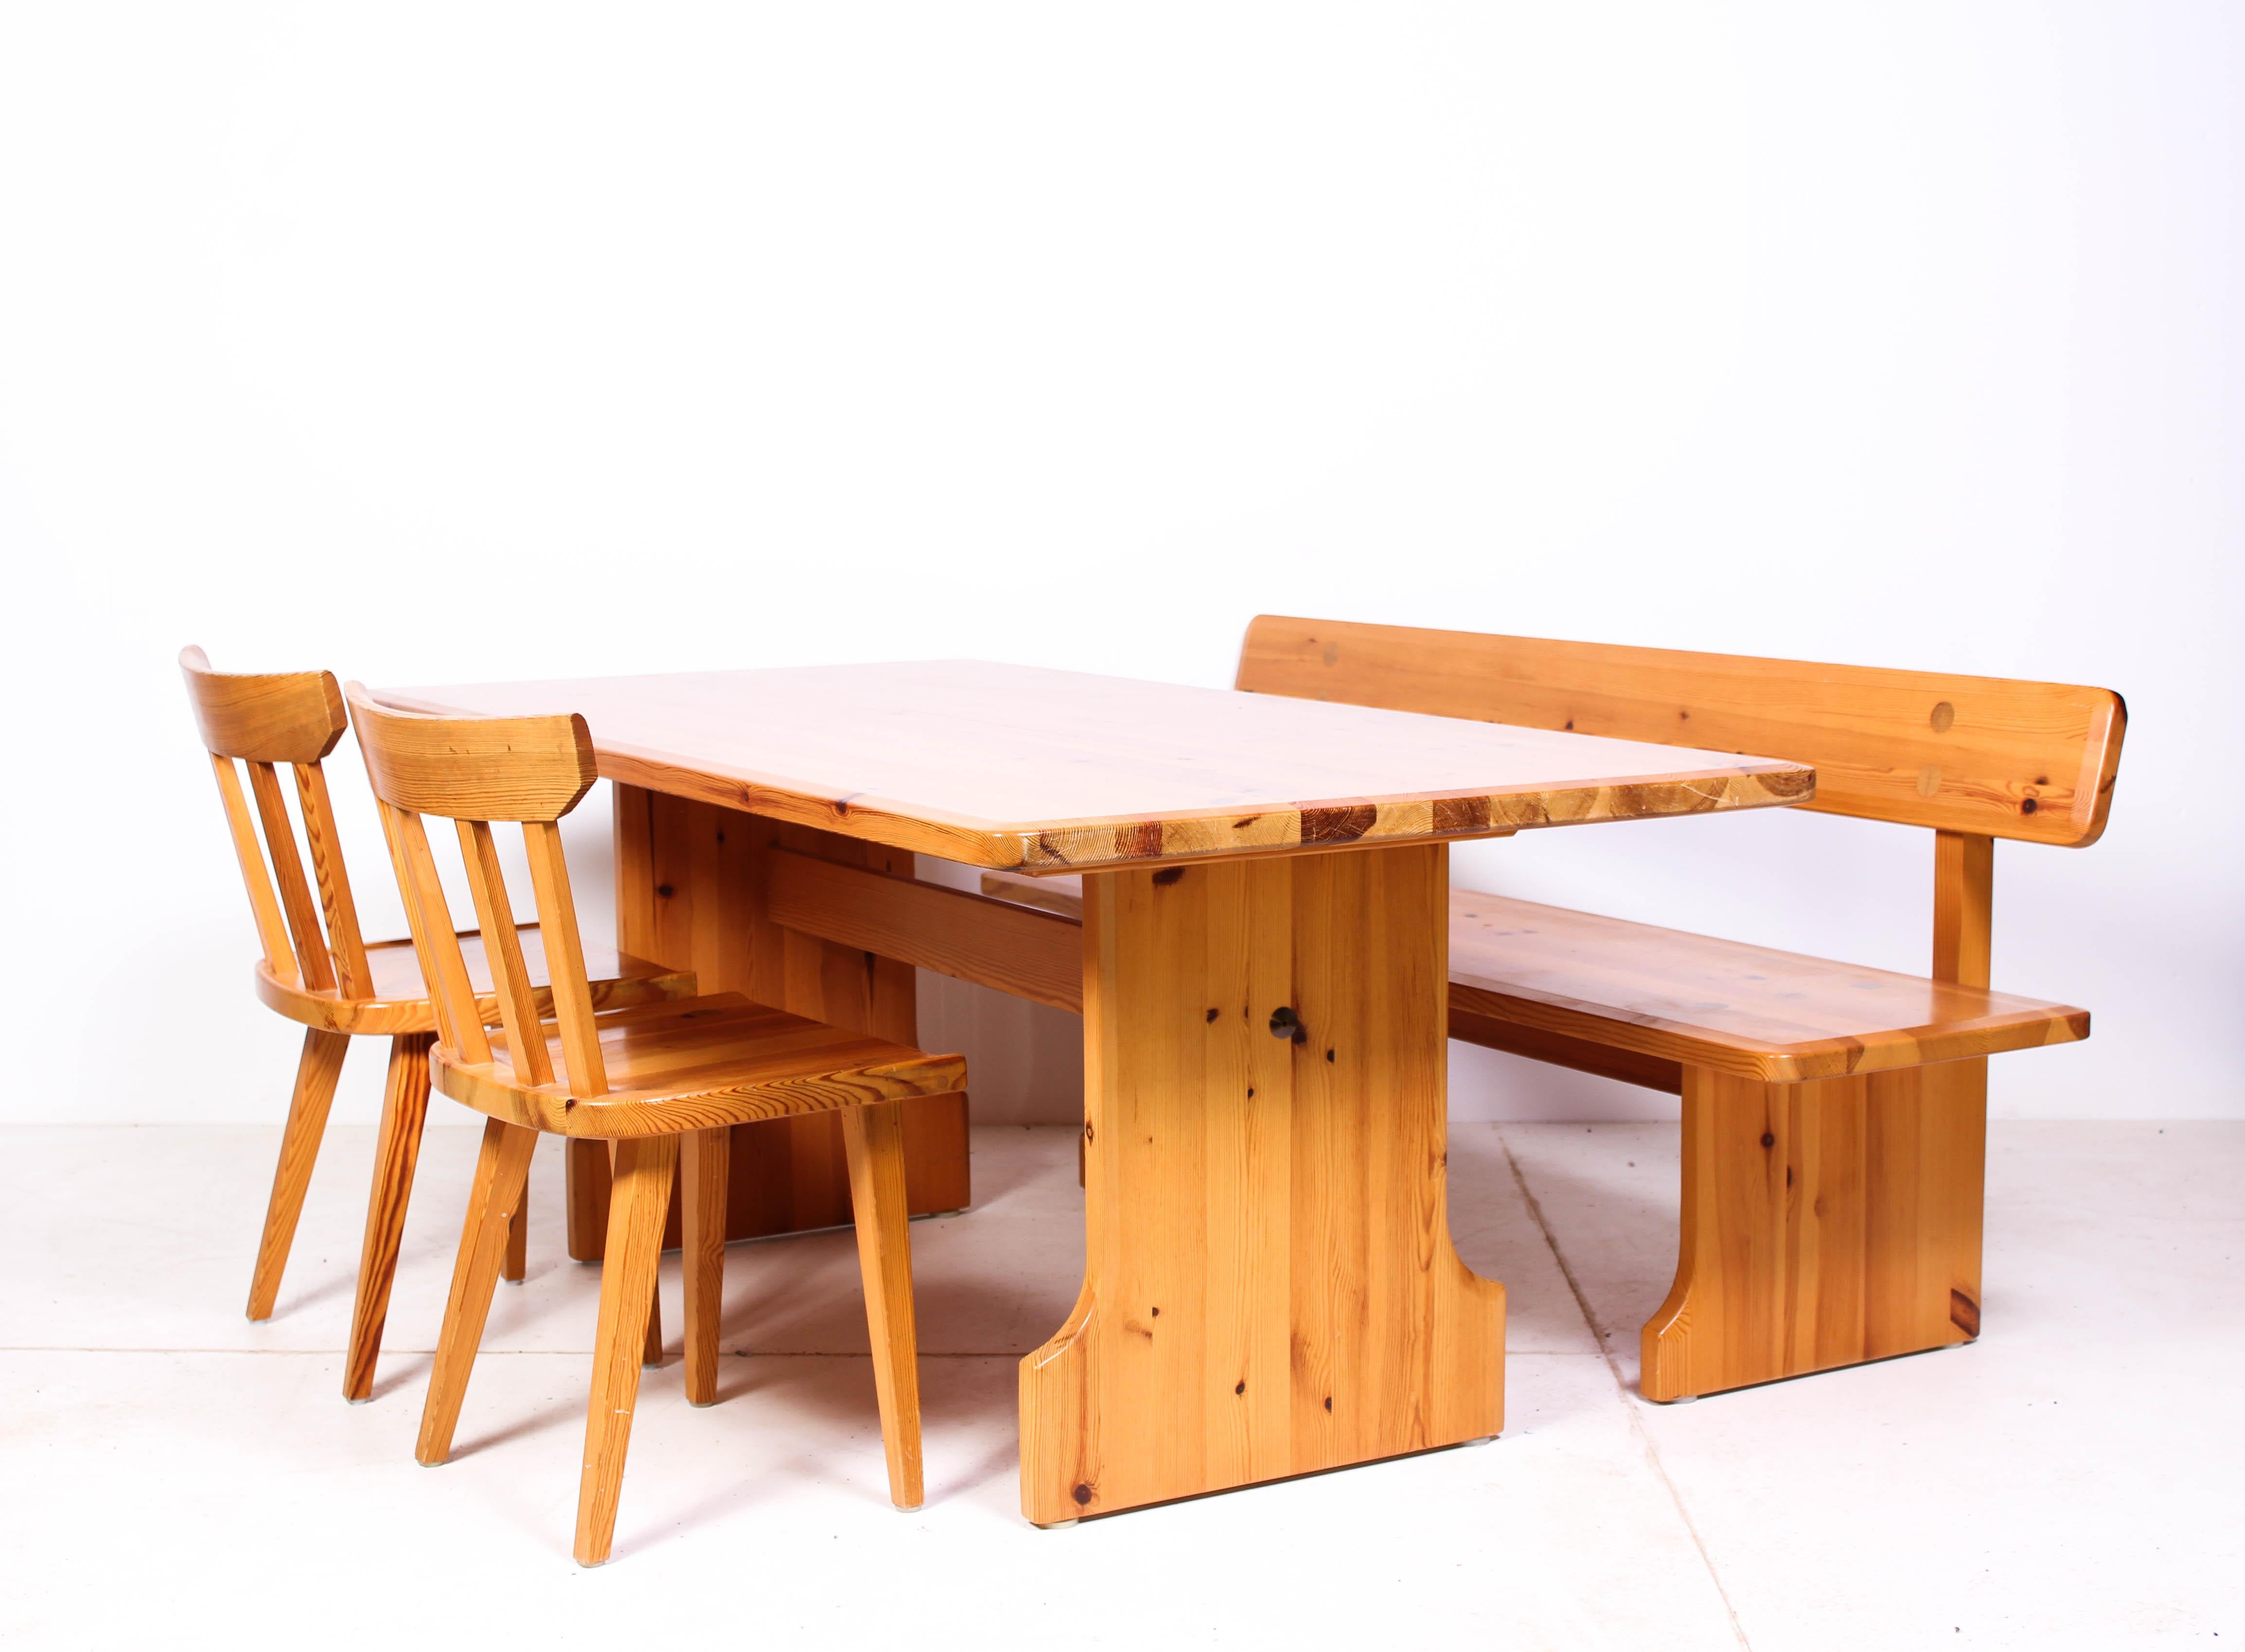 A set of dining table, two chairs and a bench made out of solid pine bu Karl Andersson & Söner. High quality and nice details, design by Carl Malmsten. The set is in very good vintage condition with some signs of usage consistent with age and use.